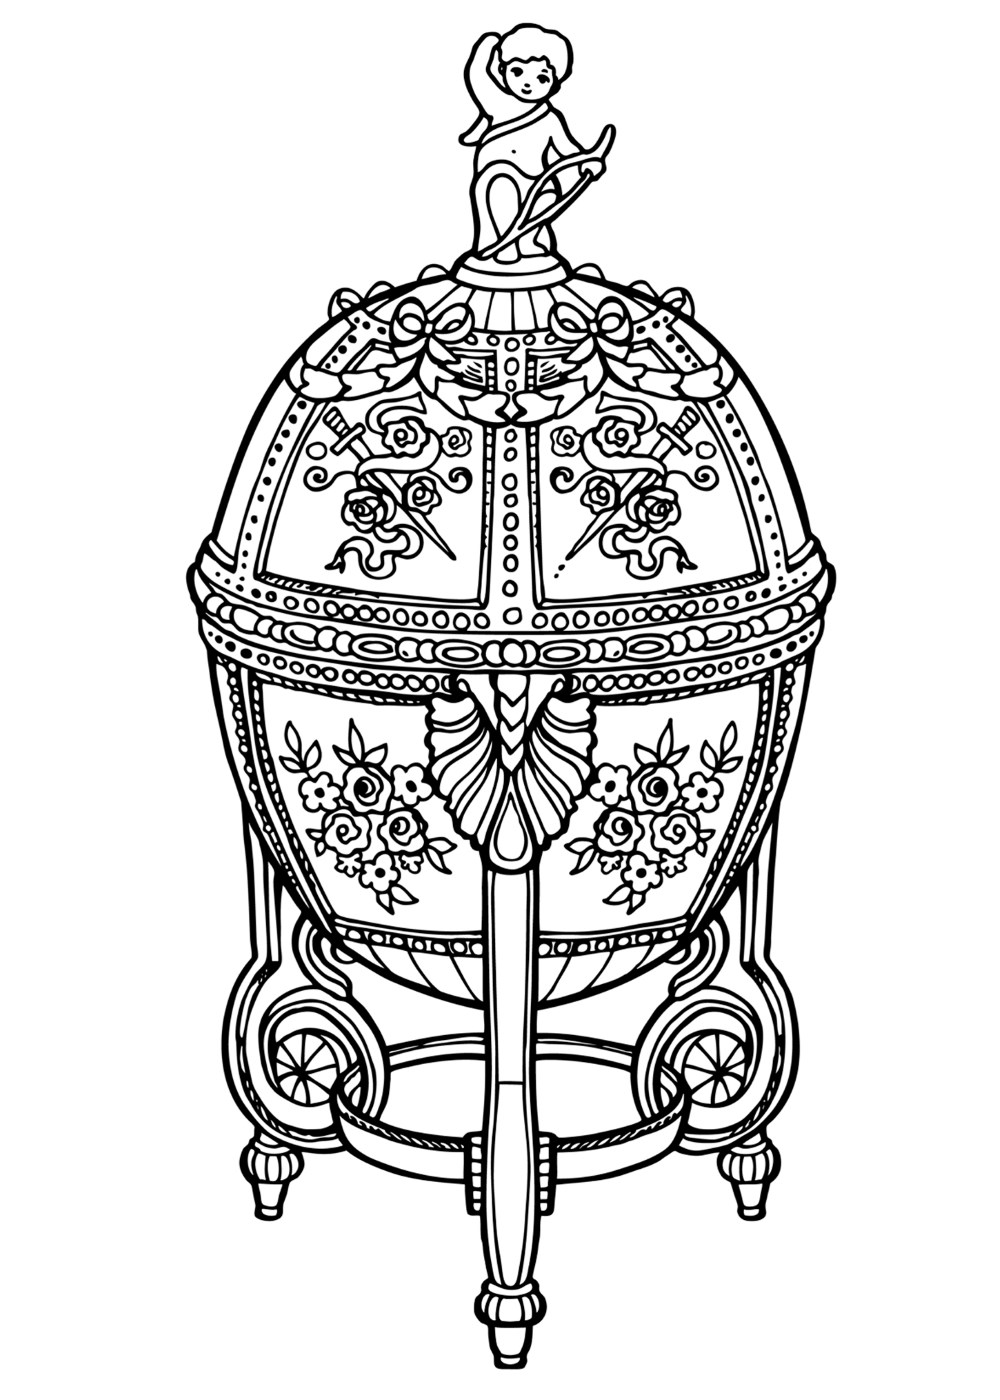 Coloring page - Faberge Egg